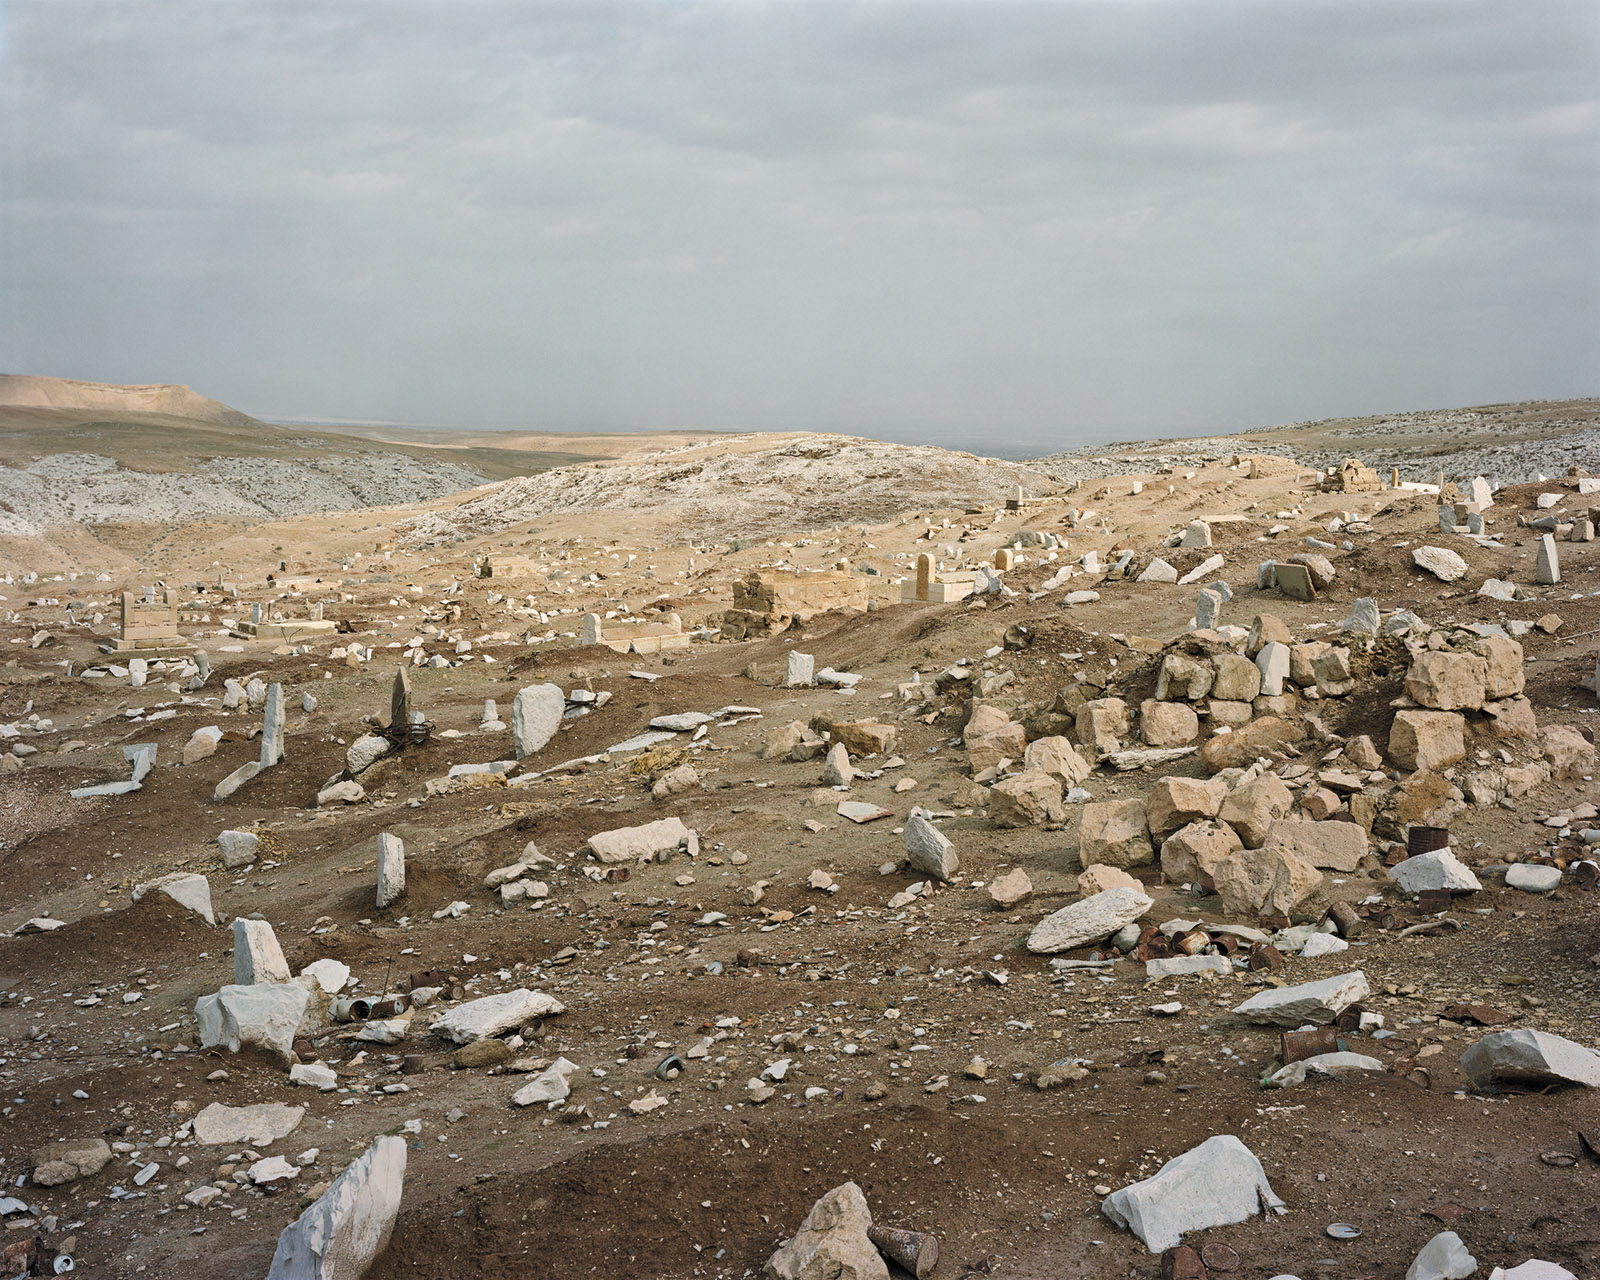 Nabi Musa, West Bank, January 19, 2010; photograph by Stephen Shore from the exhibition Stephen Shore, on view at the Museum of Modern Art, New York City, through May 28, 2018. The catalog is by Quentin Bajac, with contributions by David Campany, Kristen Gaylord, and Martino Stierli. It is published by MoMA.